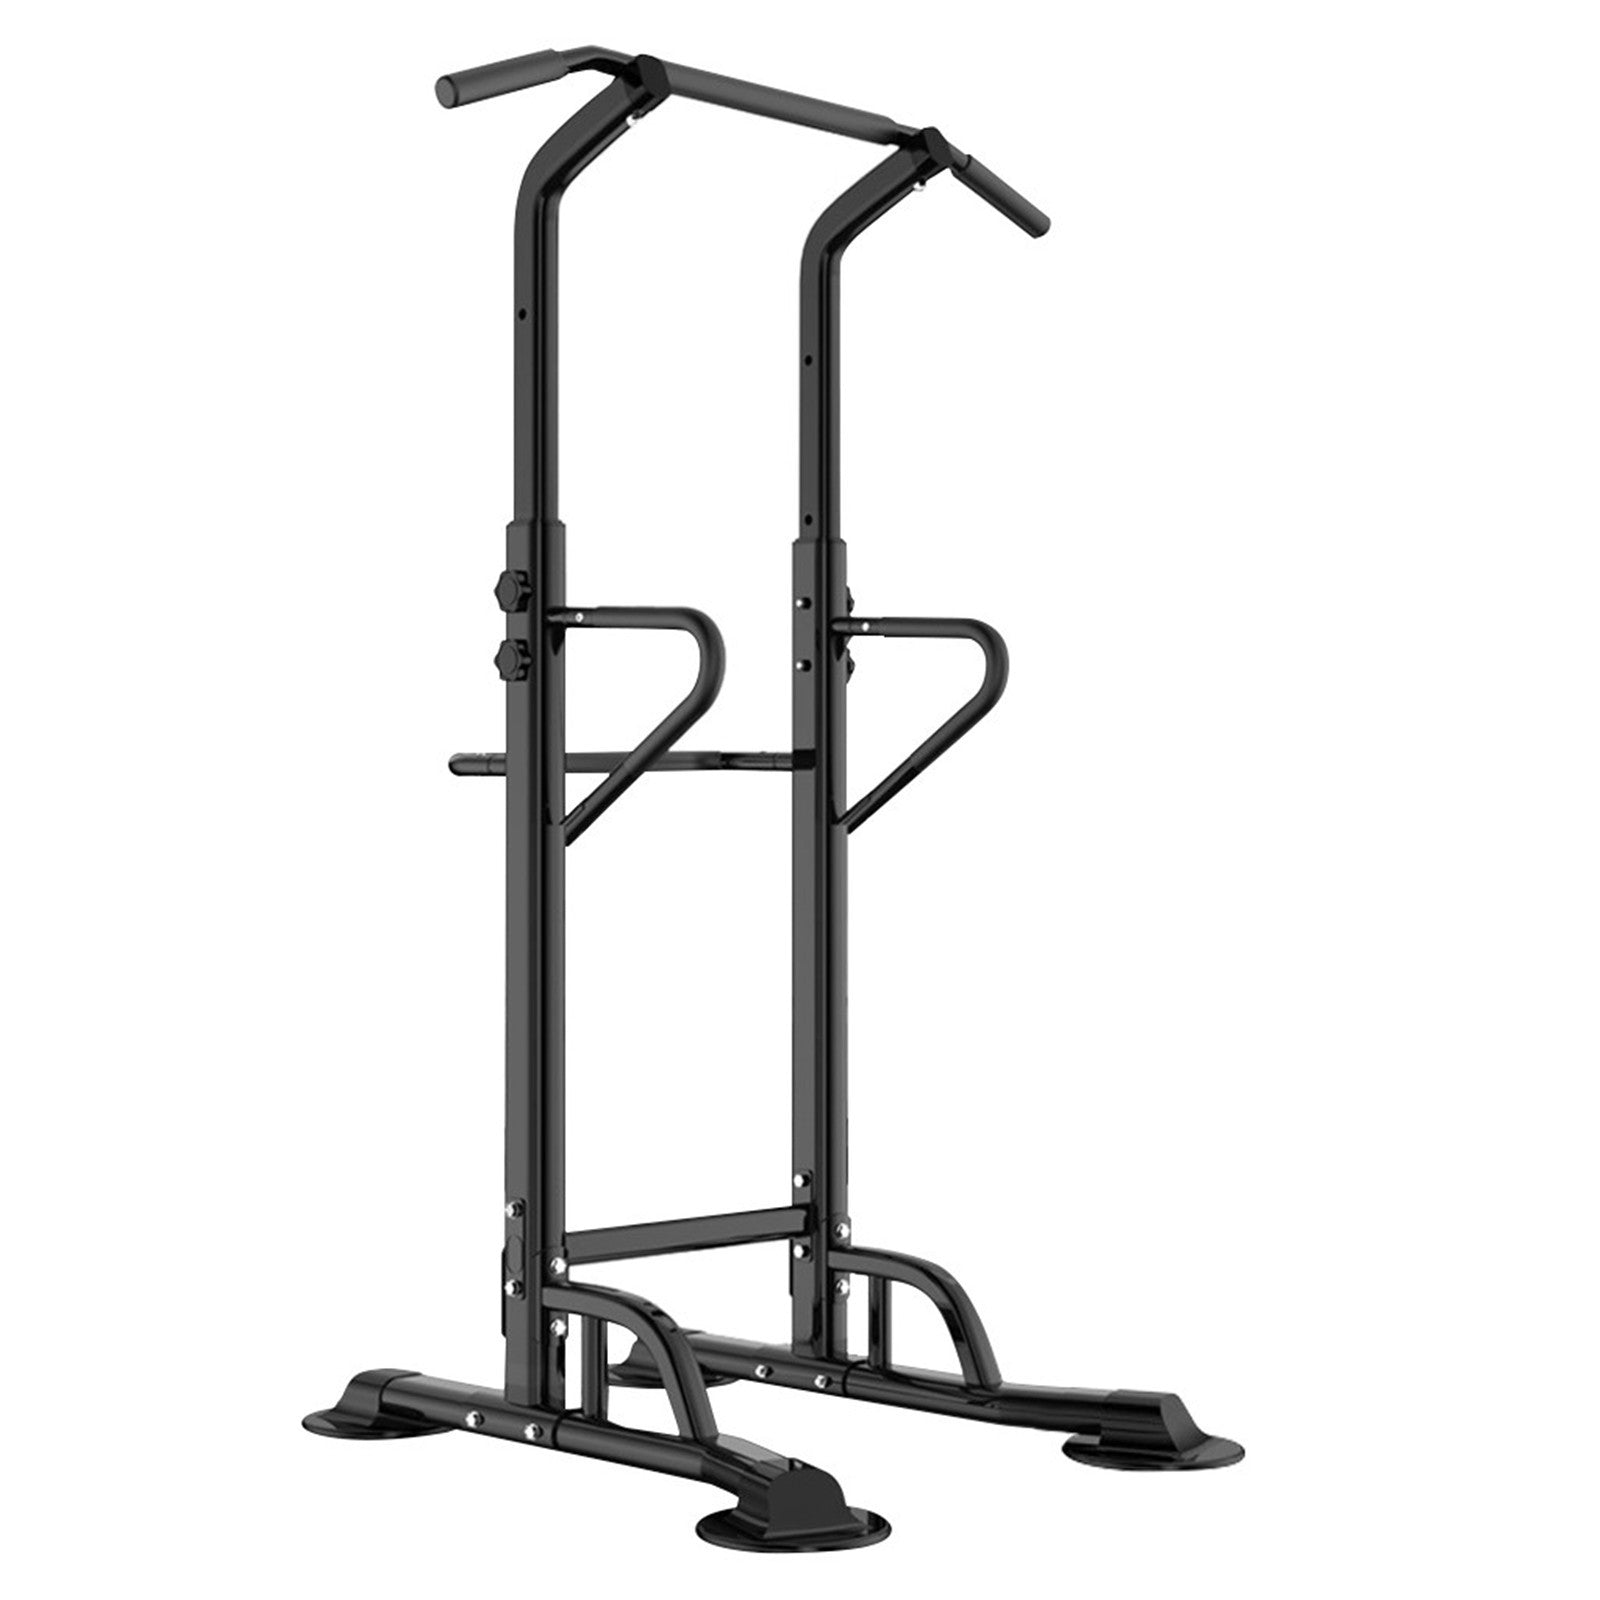 Adjustable Chin Up Stand P ull Up Bar Dip Power Tower Home Gym Fitness Workout - Plushlegacy